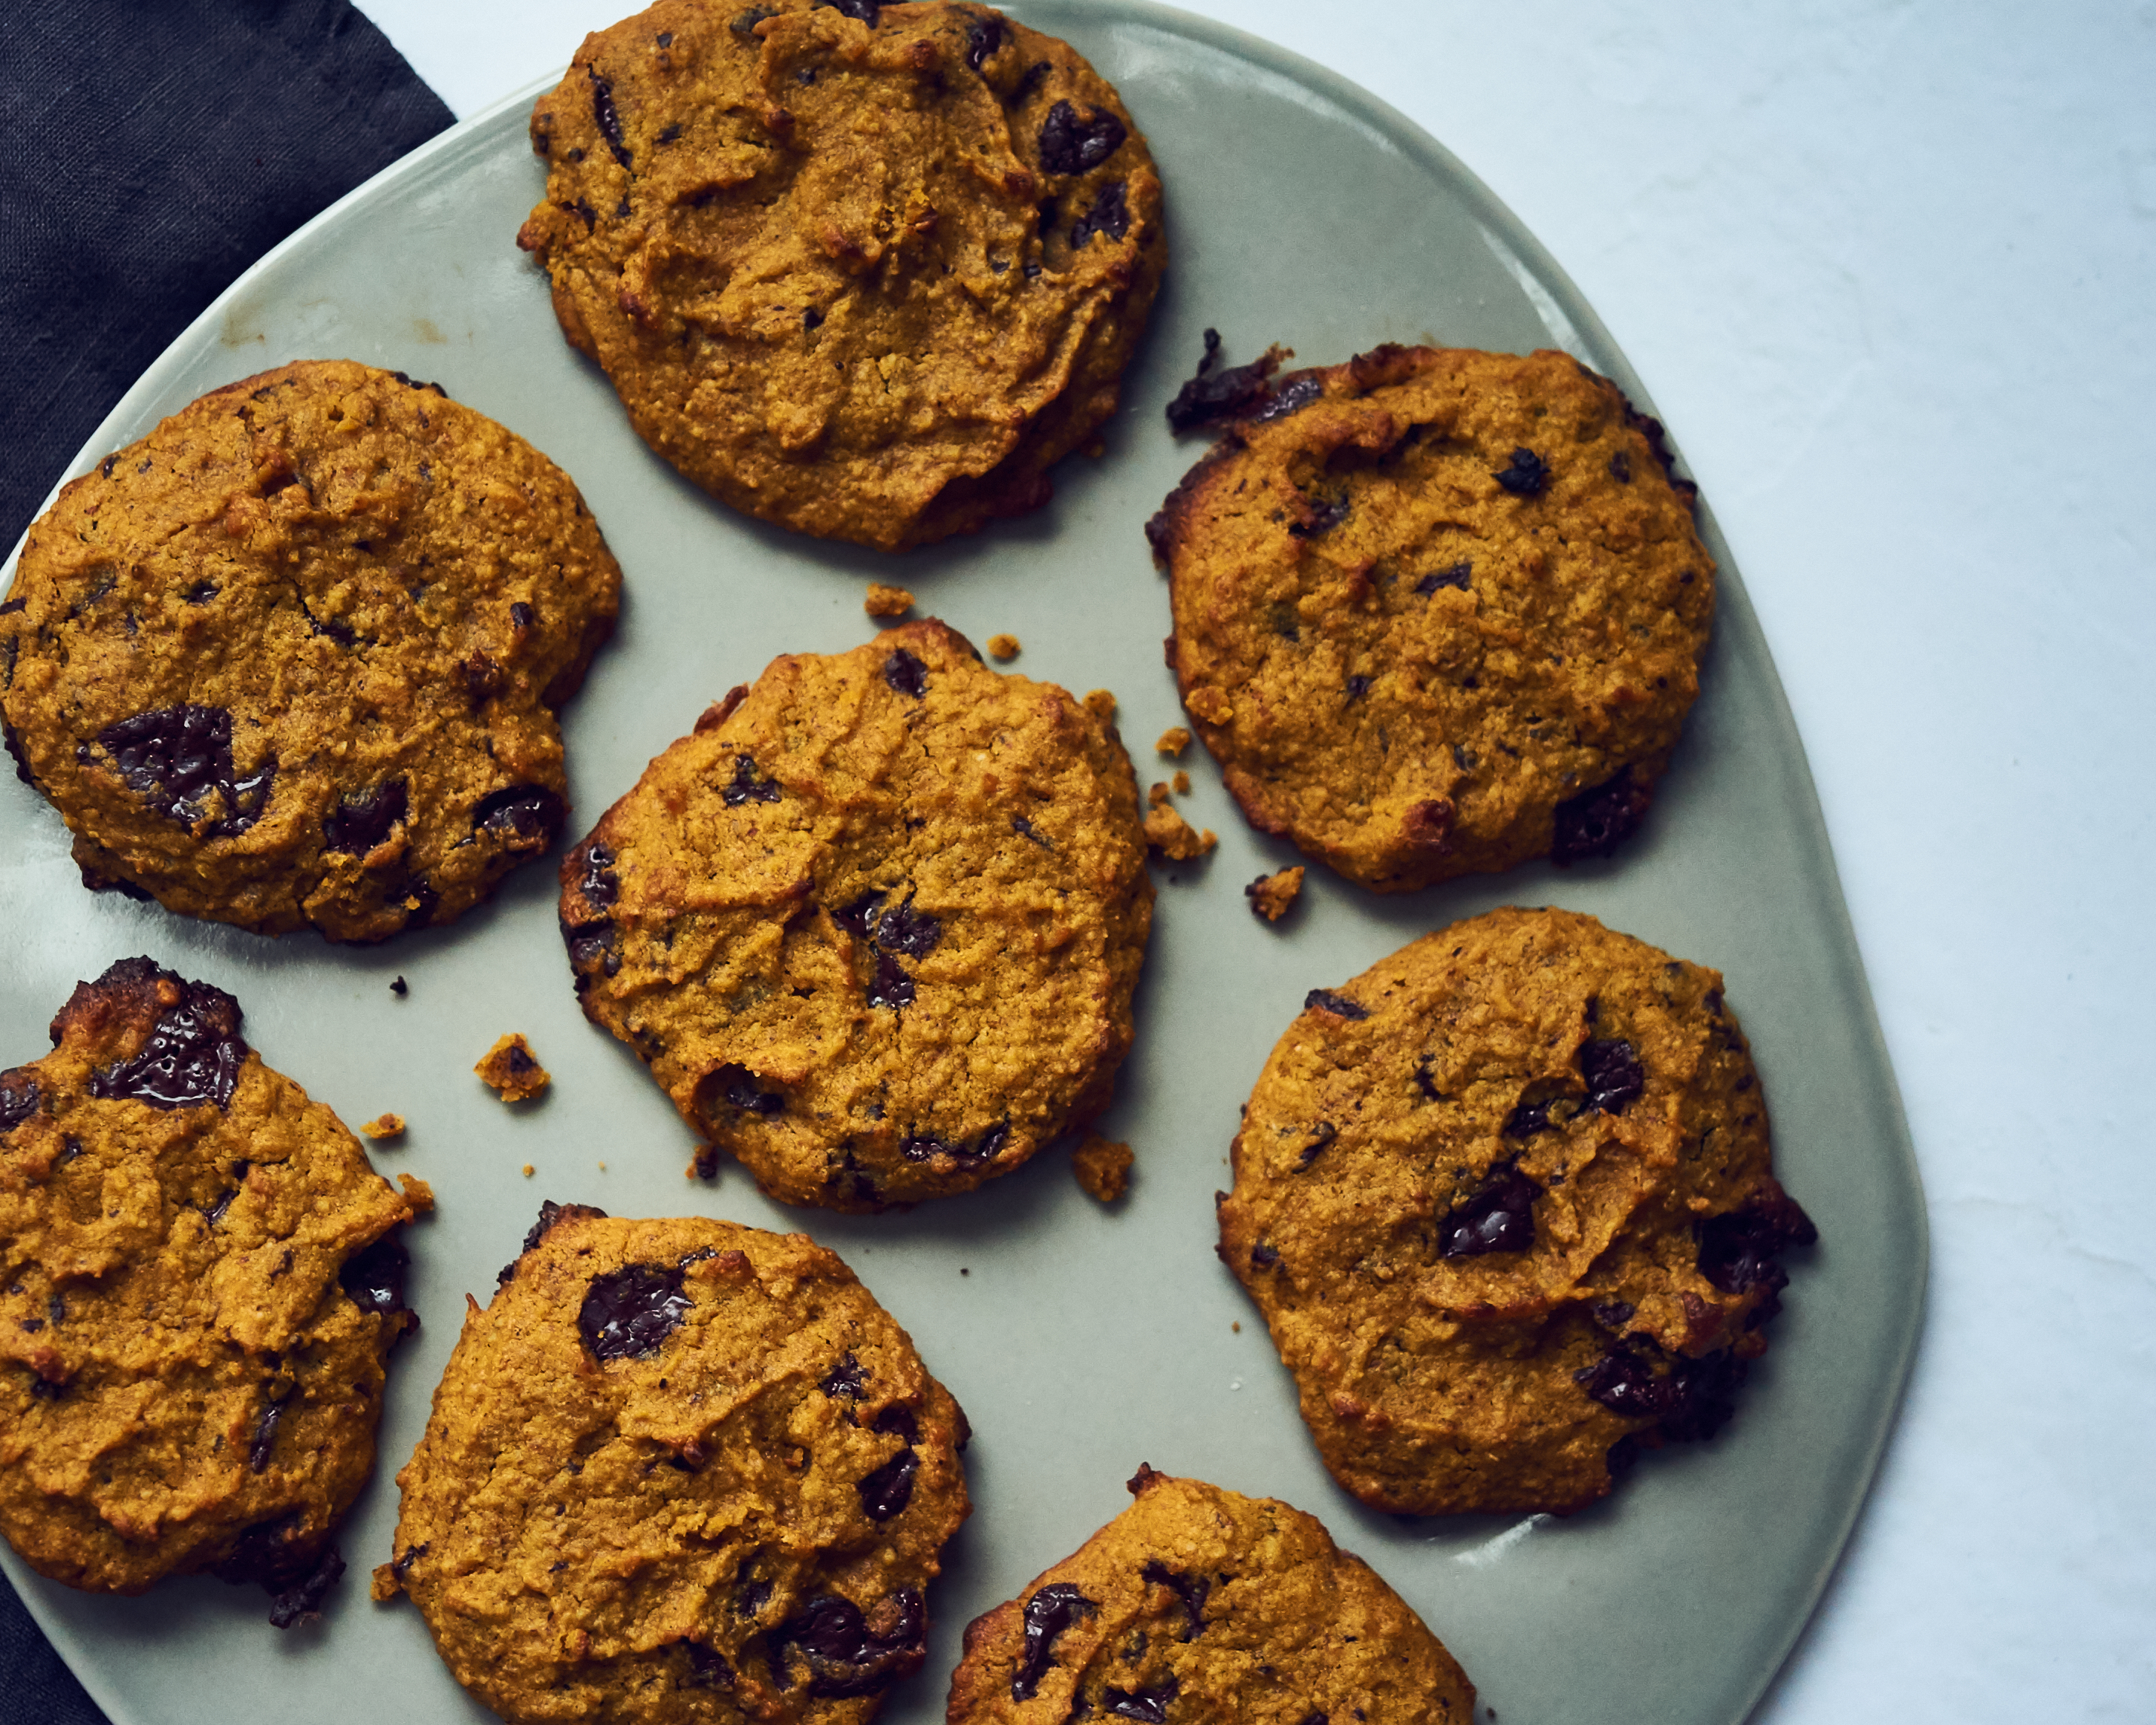 These pumpkin cookies are grain free and made with almond flour and almond butter. They are gluten fee and healthy for the paleo diet.